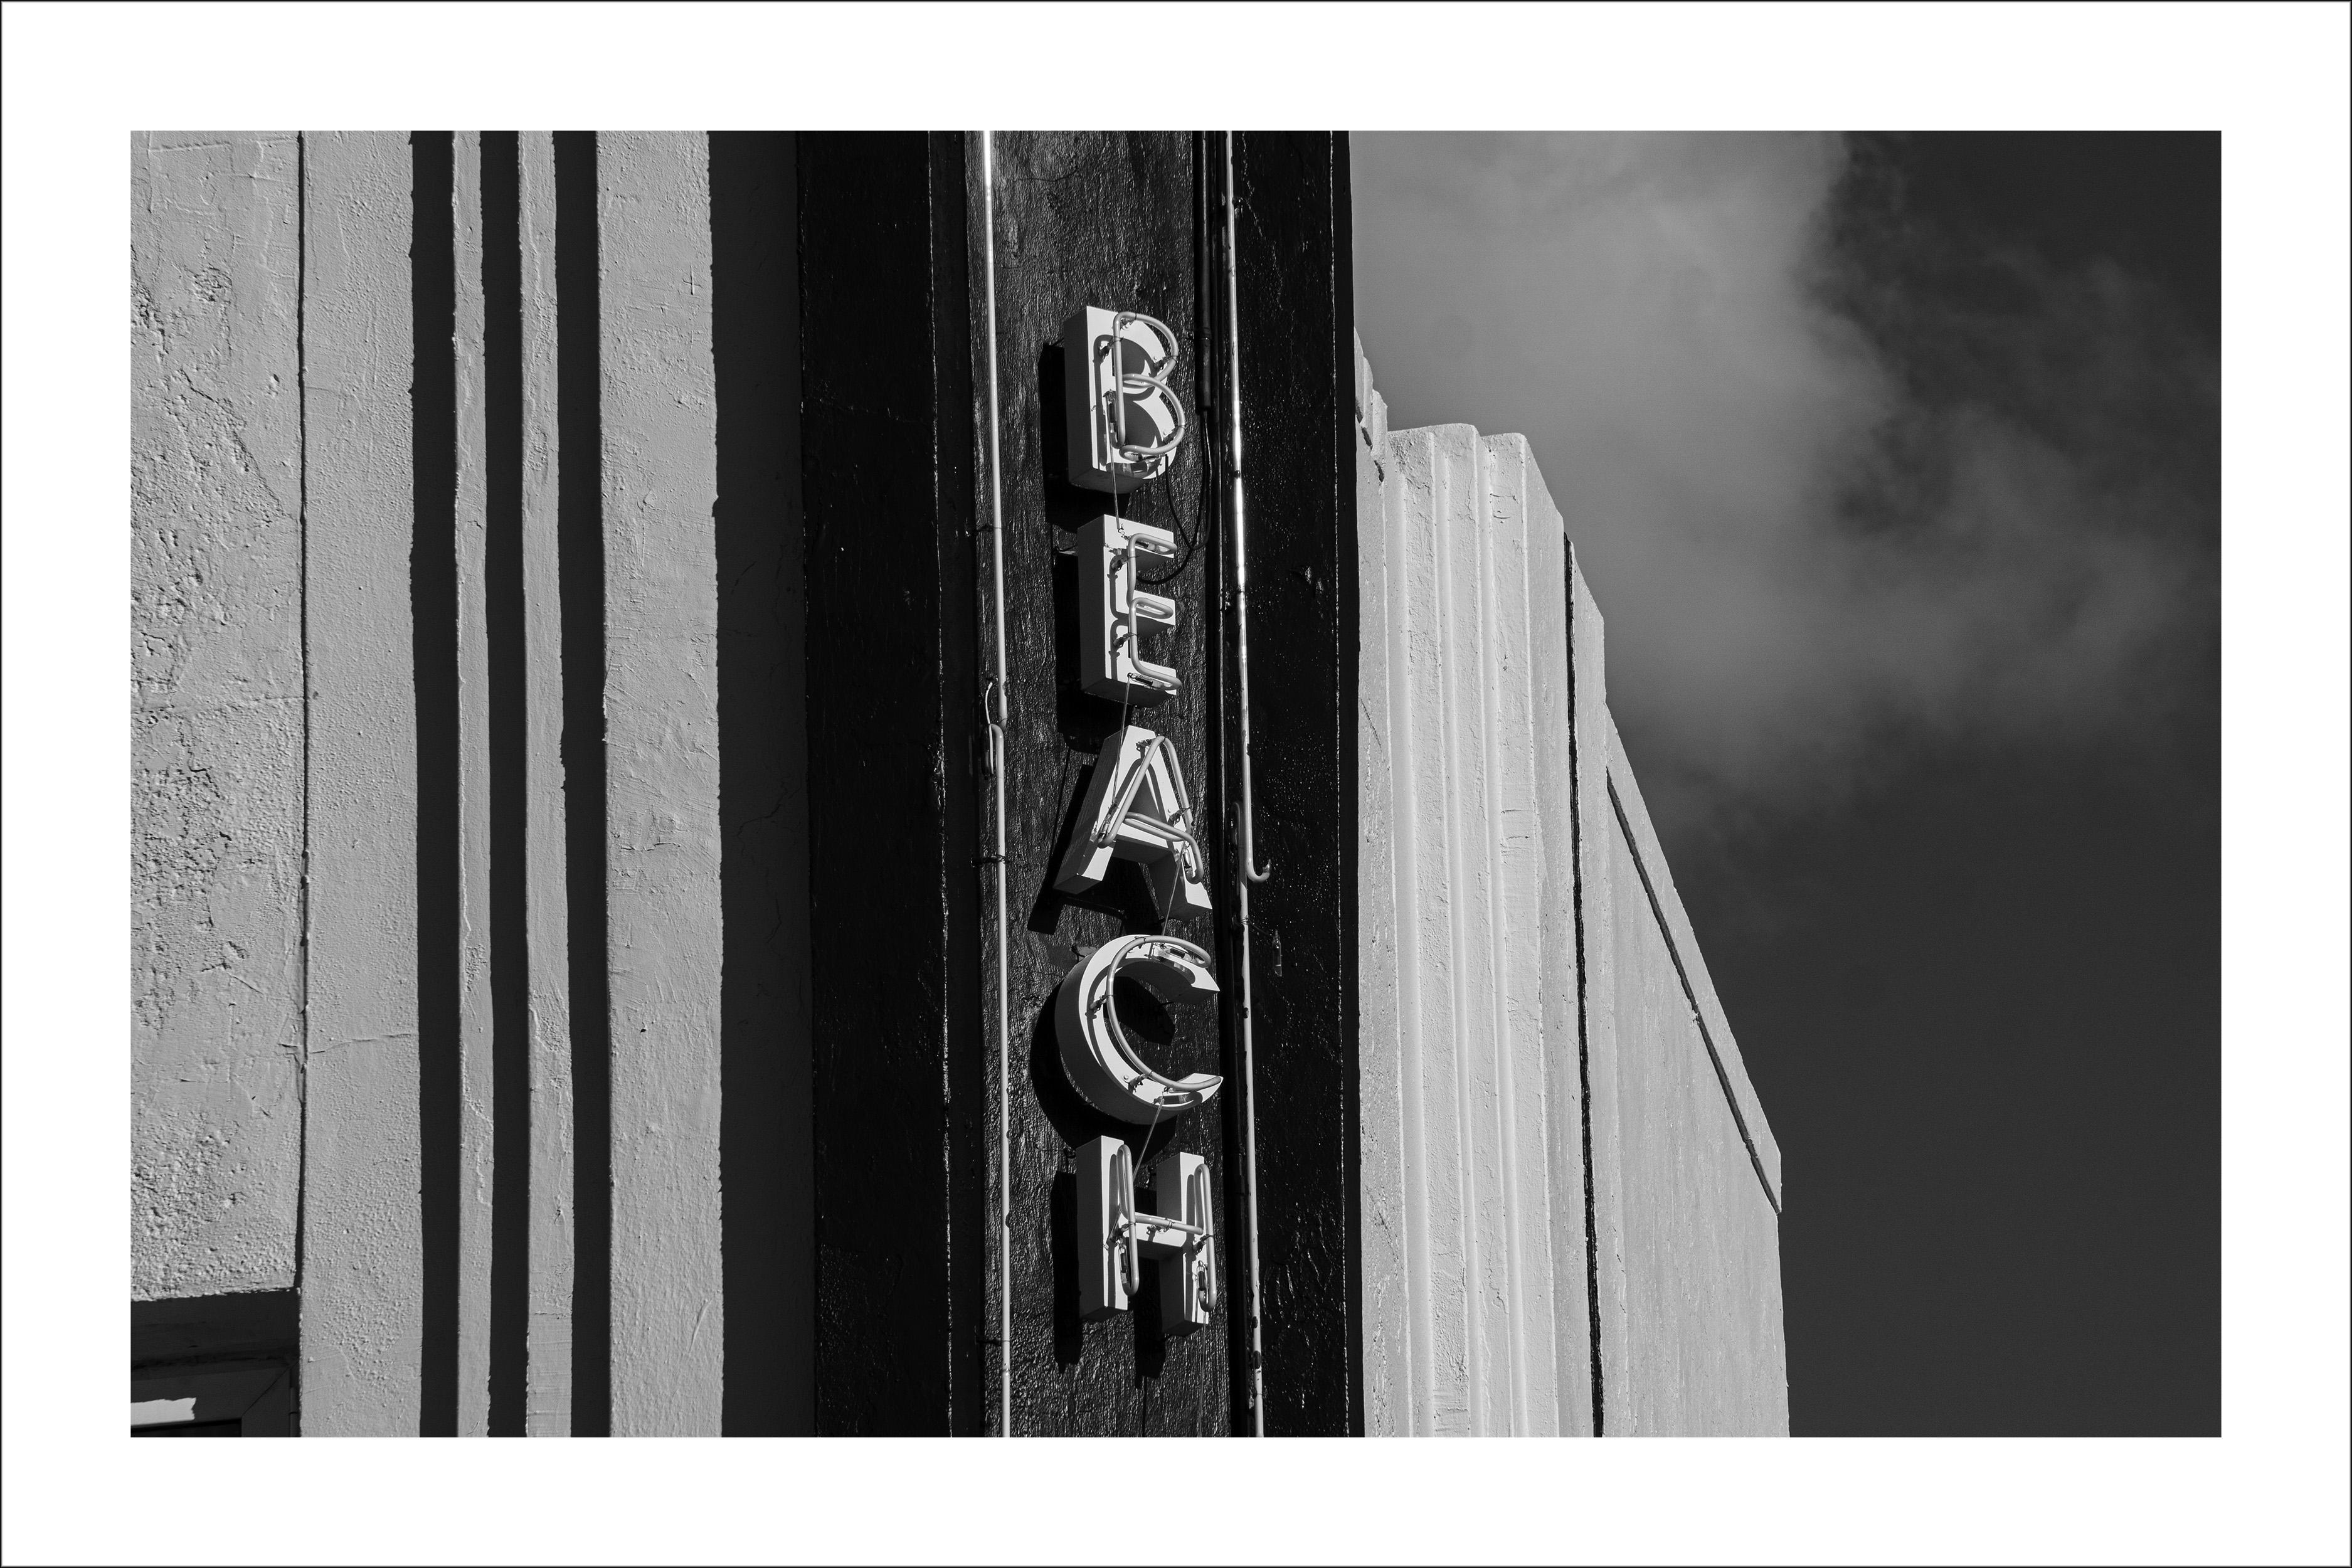 Kind of Cyan Black and White Photograph - Beach Neon Letters, Black and White Limited Edition, Miami Hotel, Architecture